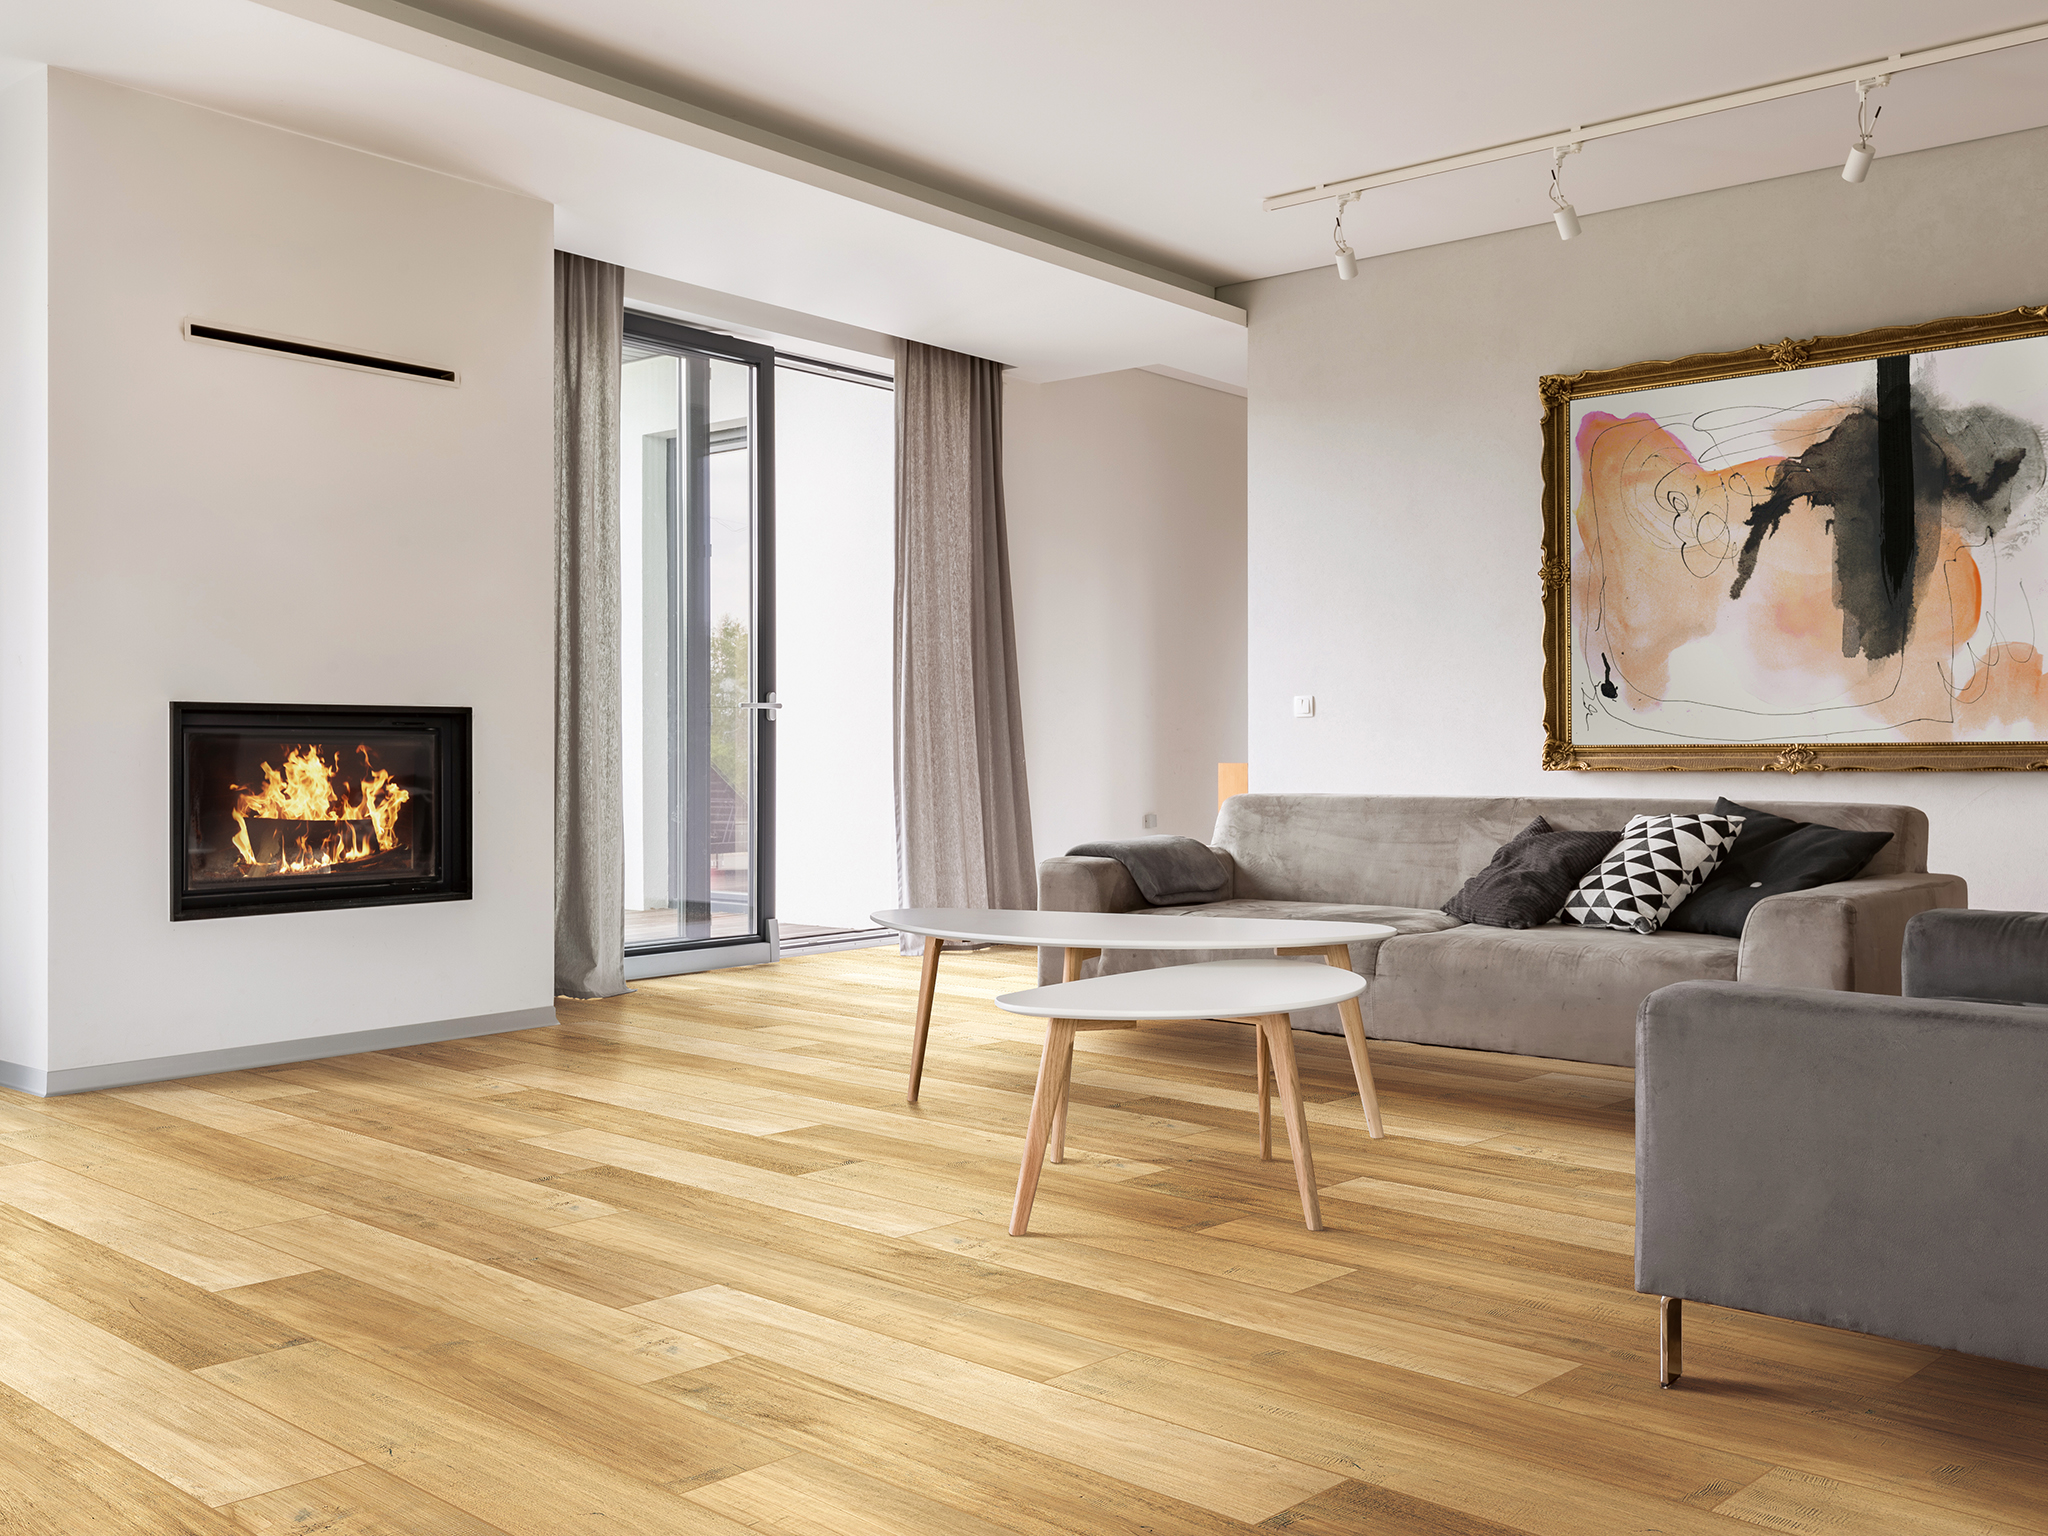 Paramount Engineered Hardwood Country View Maple Sandy Road Hassle Free Flooring